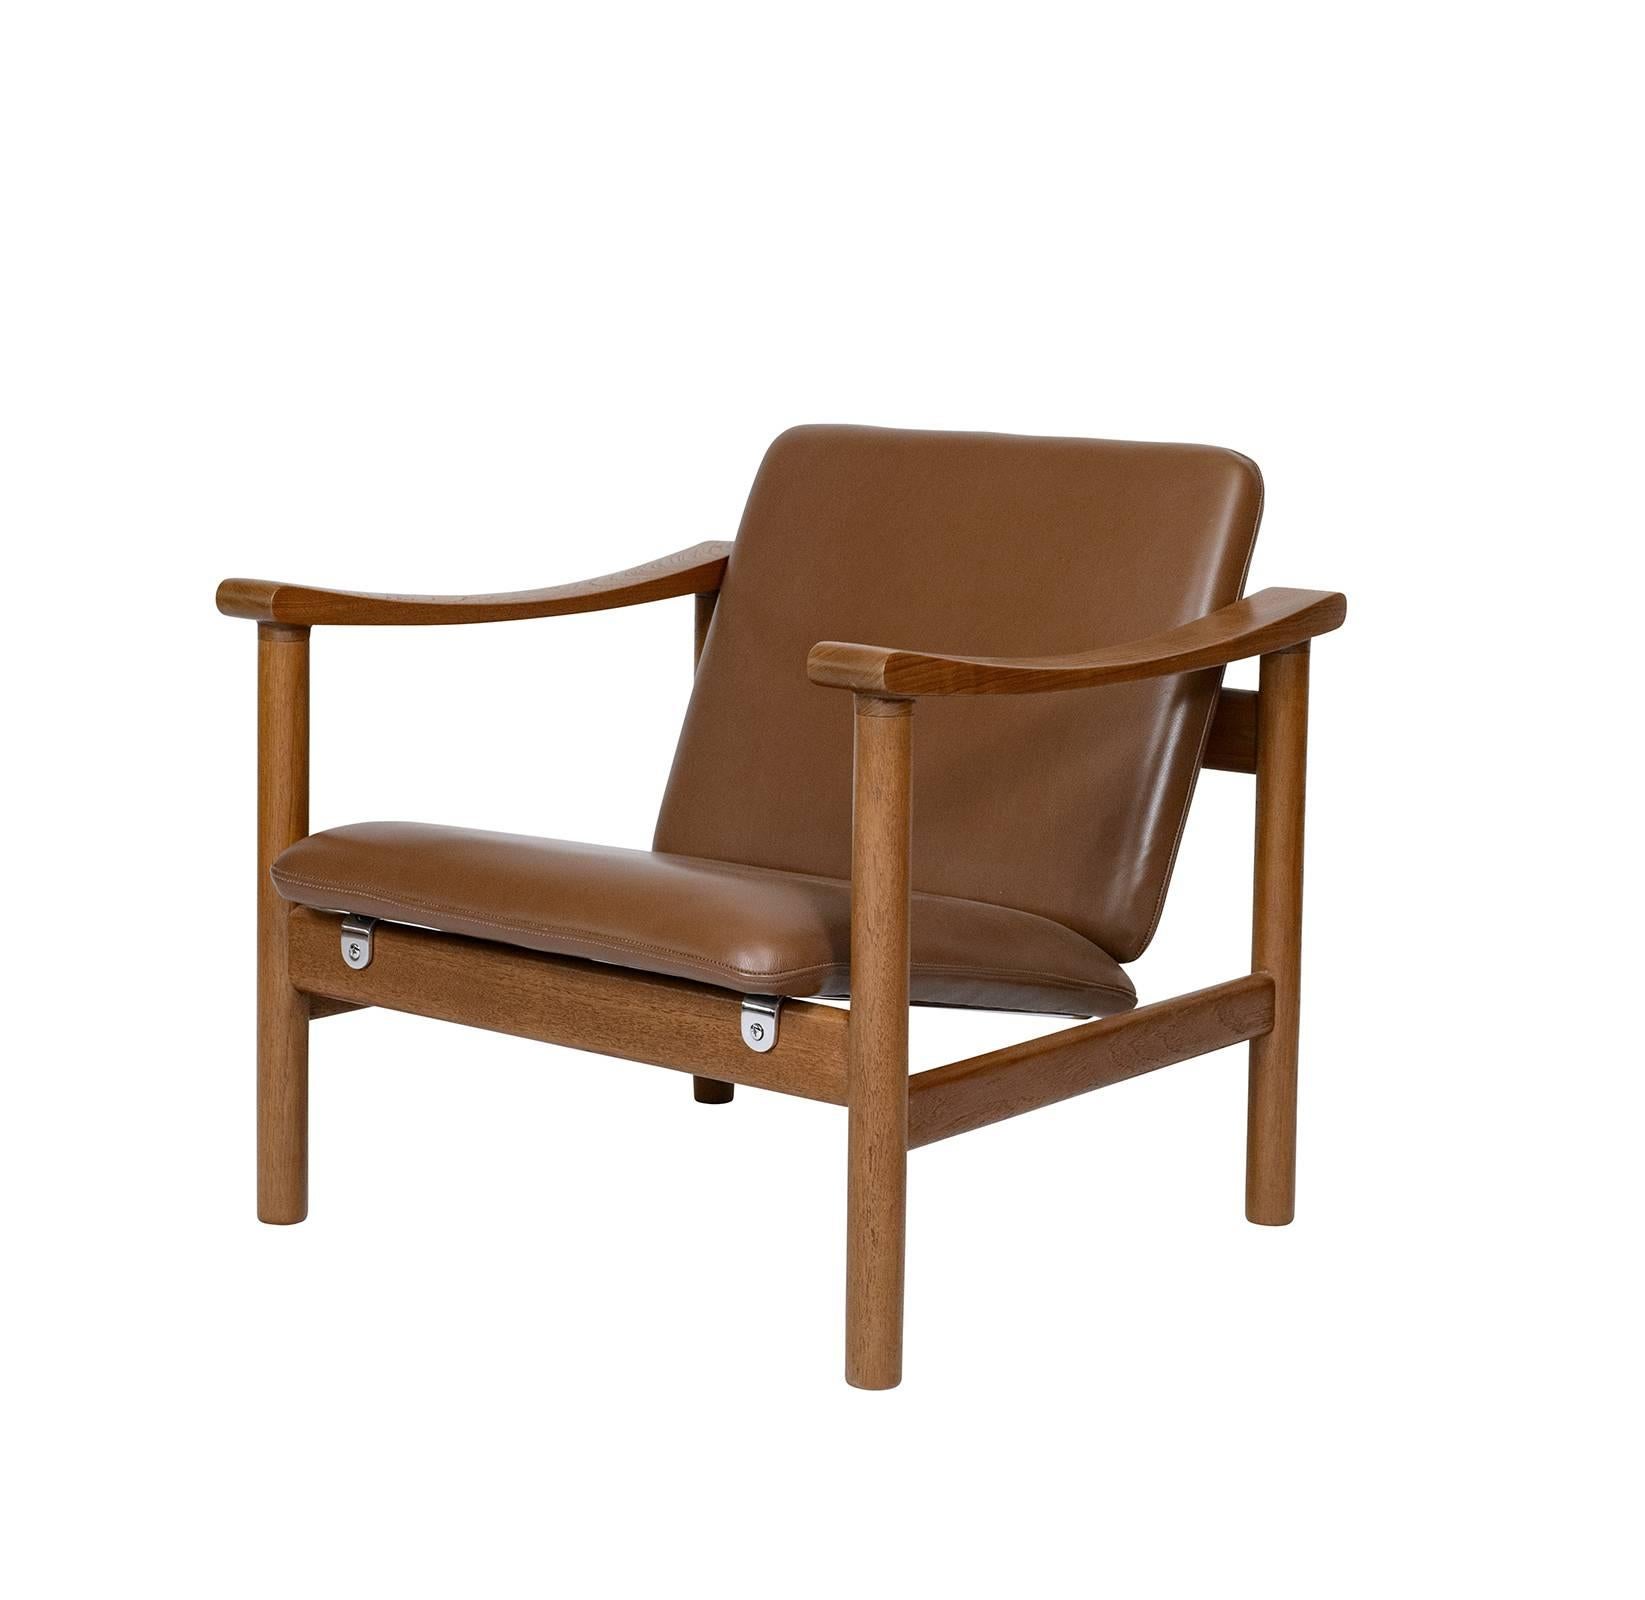 Hans Wegner GE-280 lounge chair designed in 1960 and produced by GETAMA. Note: We have a pair in need of reupholstering.